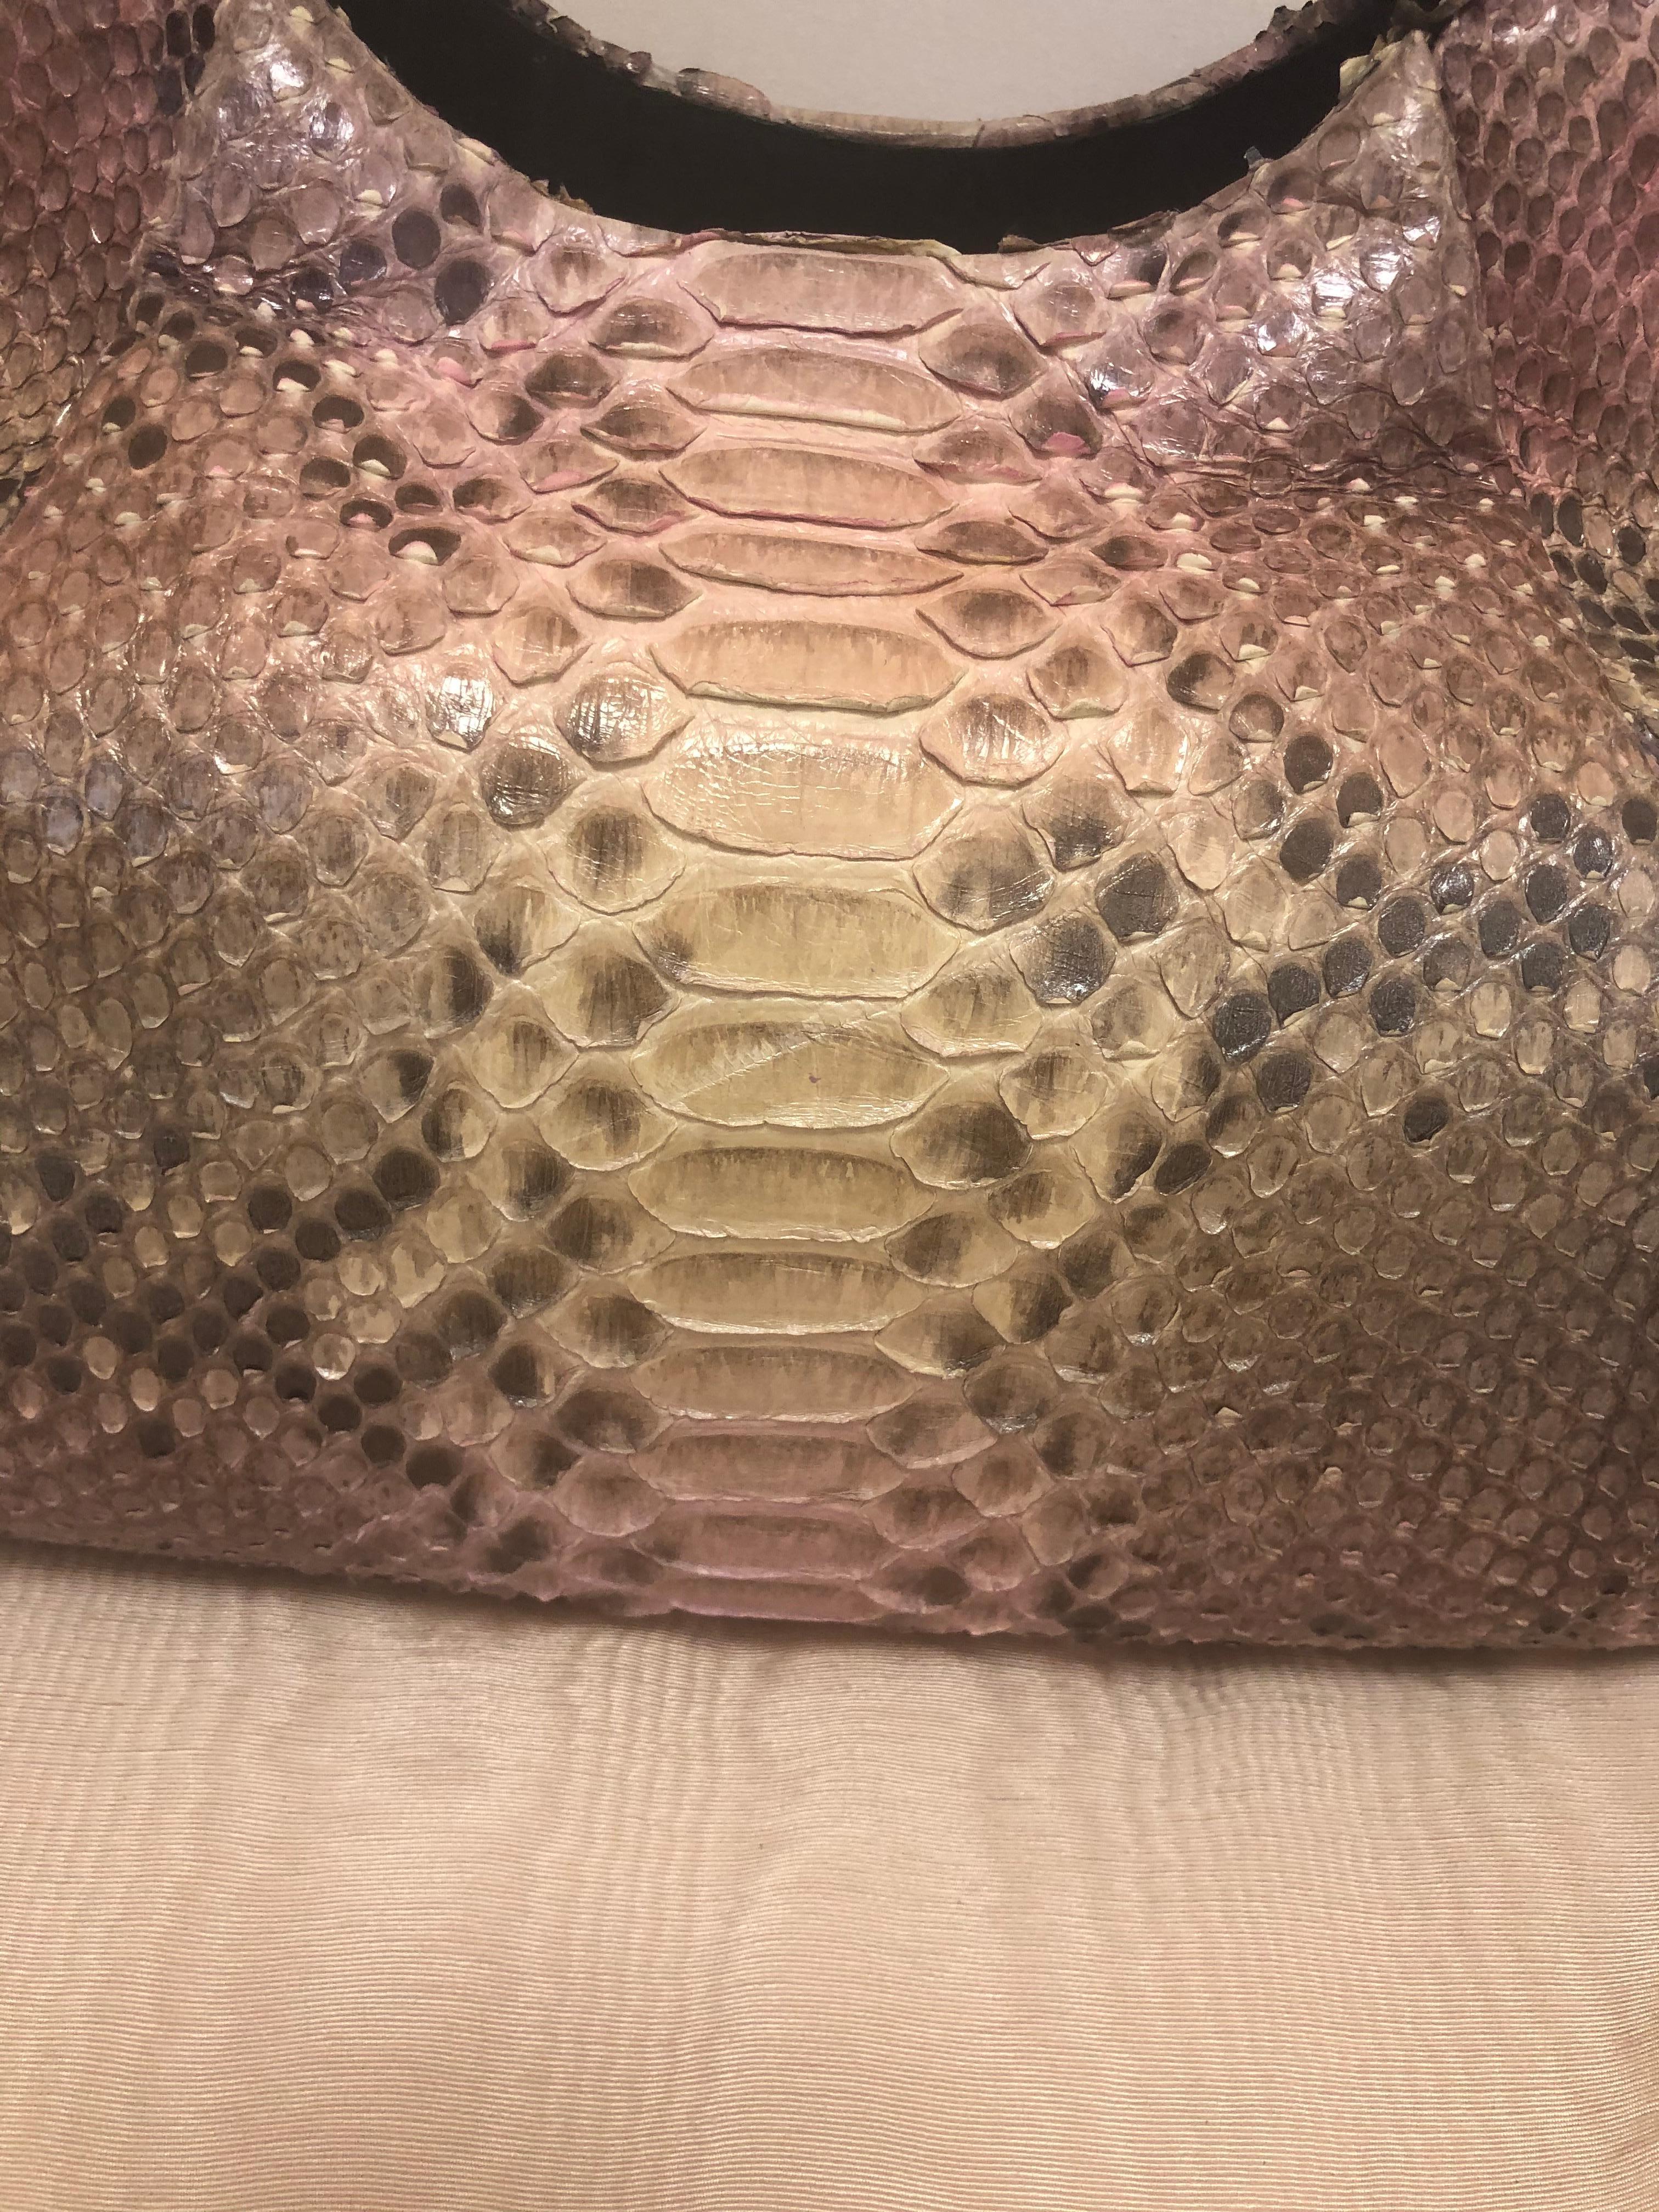 Well crafted bag with purple/pink/brown colors. It is soft sided and therefore practical, as well as elegant.  The main body of the bag is python with the handles and trim being crocodile. The light purple suede lining has a zipped pocket as well as